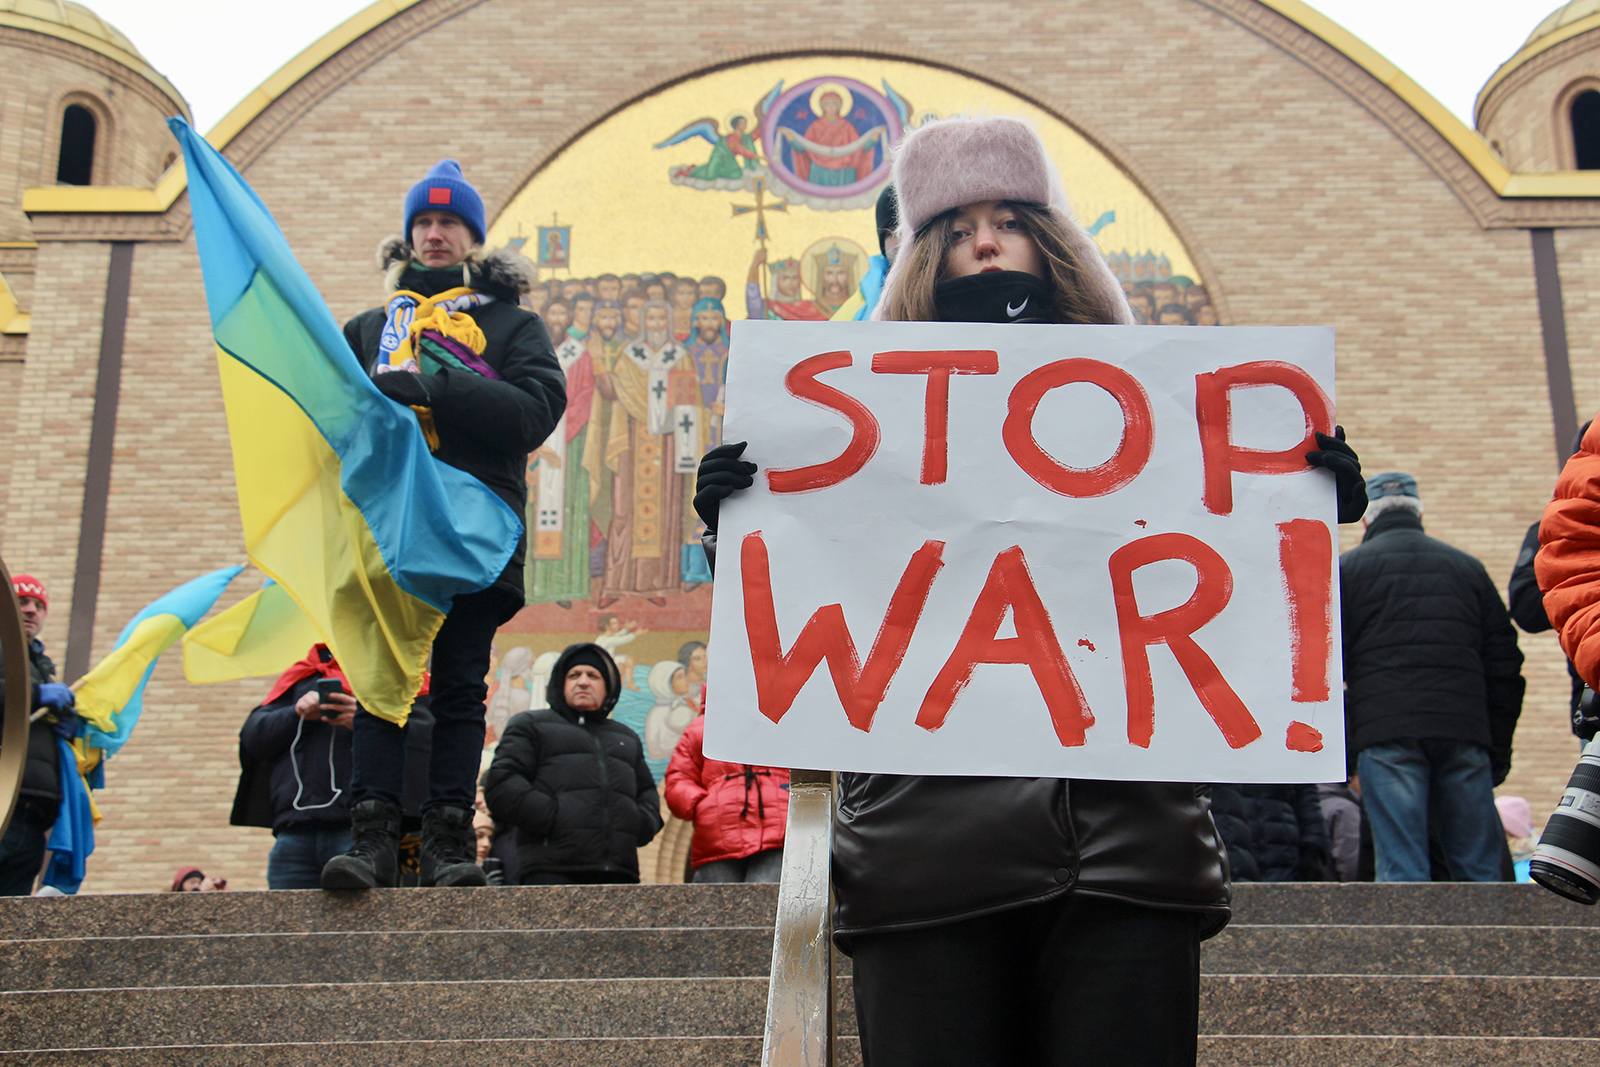 Inna Zotikova, 26, of Chicago, holds a sign during a rally outside the Sts. Volodymyr and Olha Ukrainian Catholic Church in Chicago's Ukrainian Village neighborhood, Thursday, Feb. 24, 2022. RNS photo by Emily McFarlan Miller